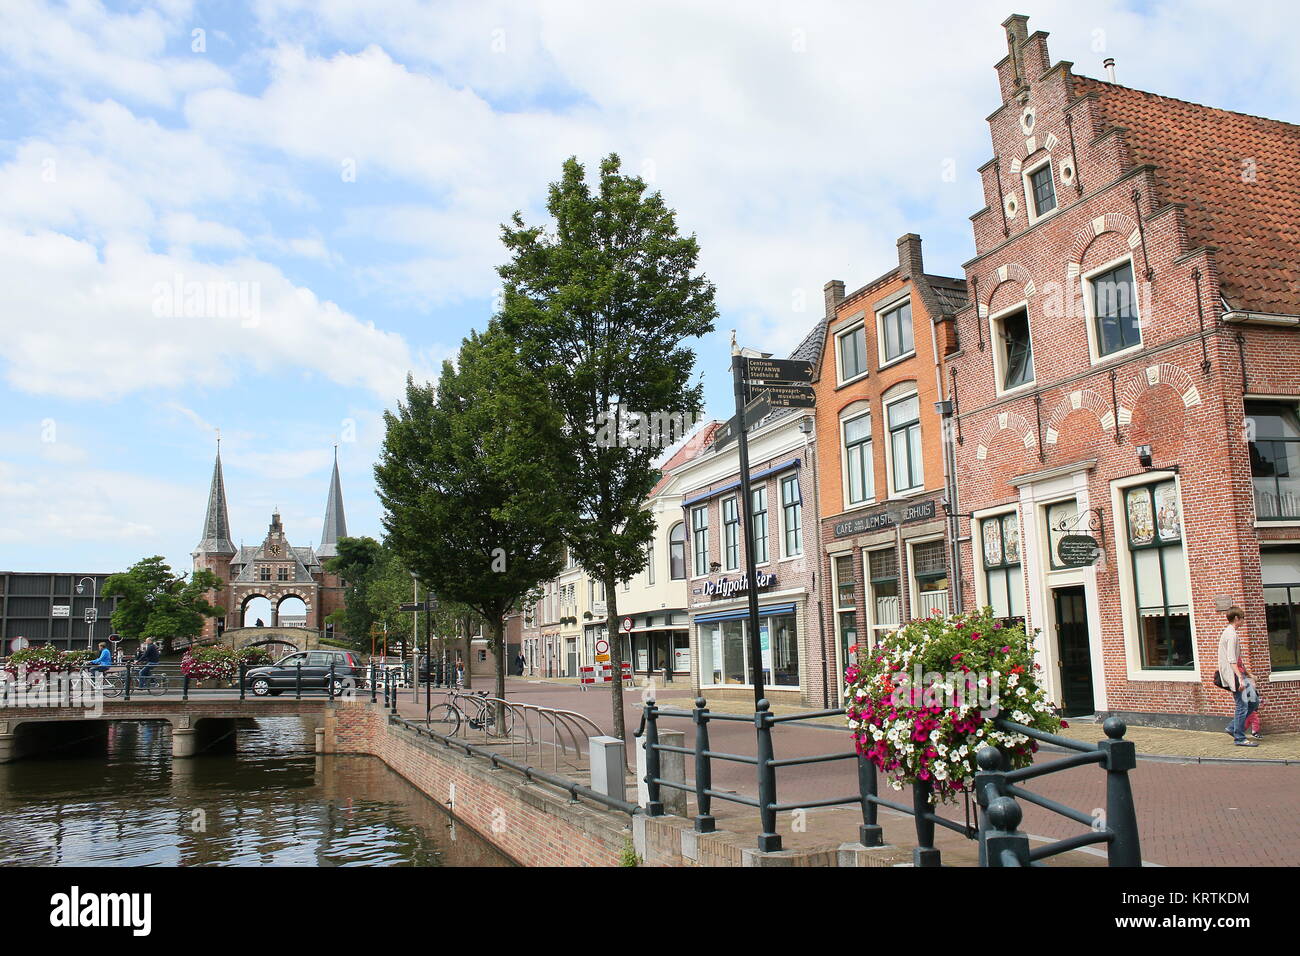 17th century Waterpoort or Water Gate in the Frisian city of Sneek, The Netherlands Stock Photo